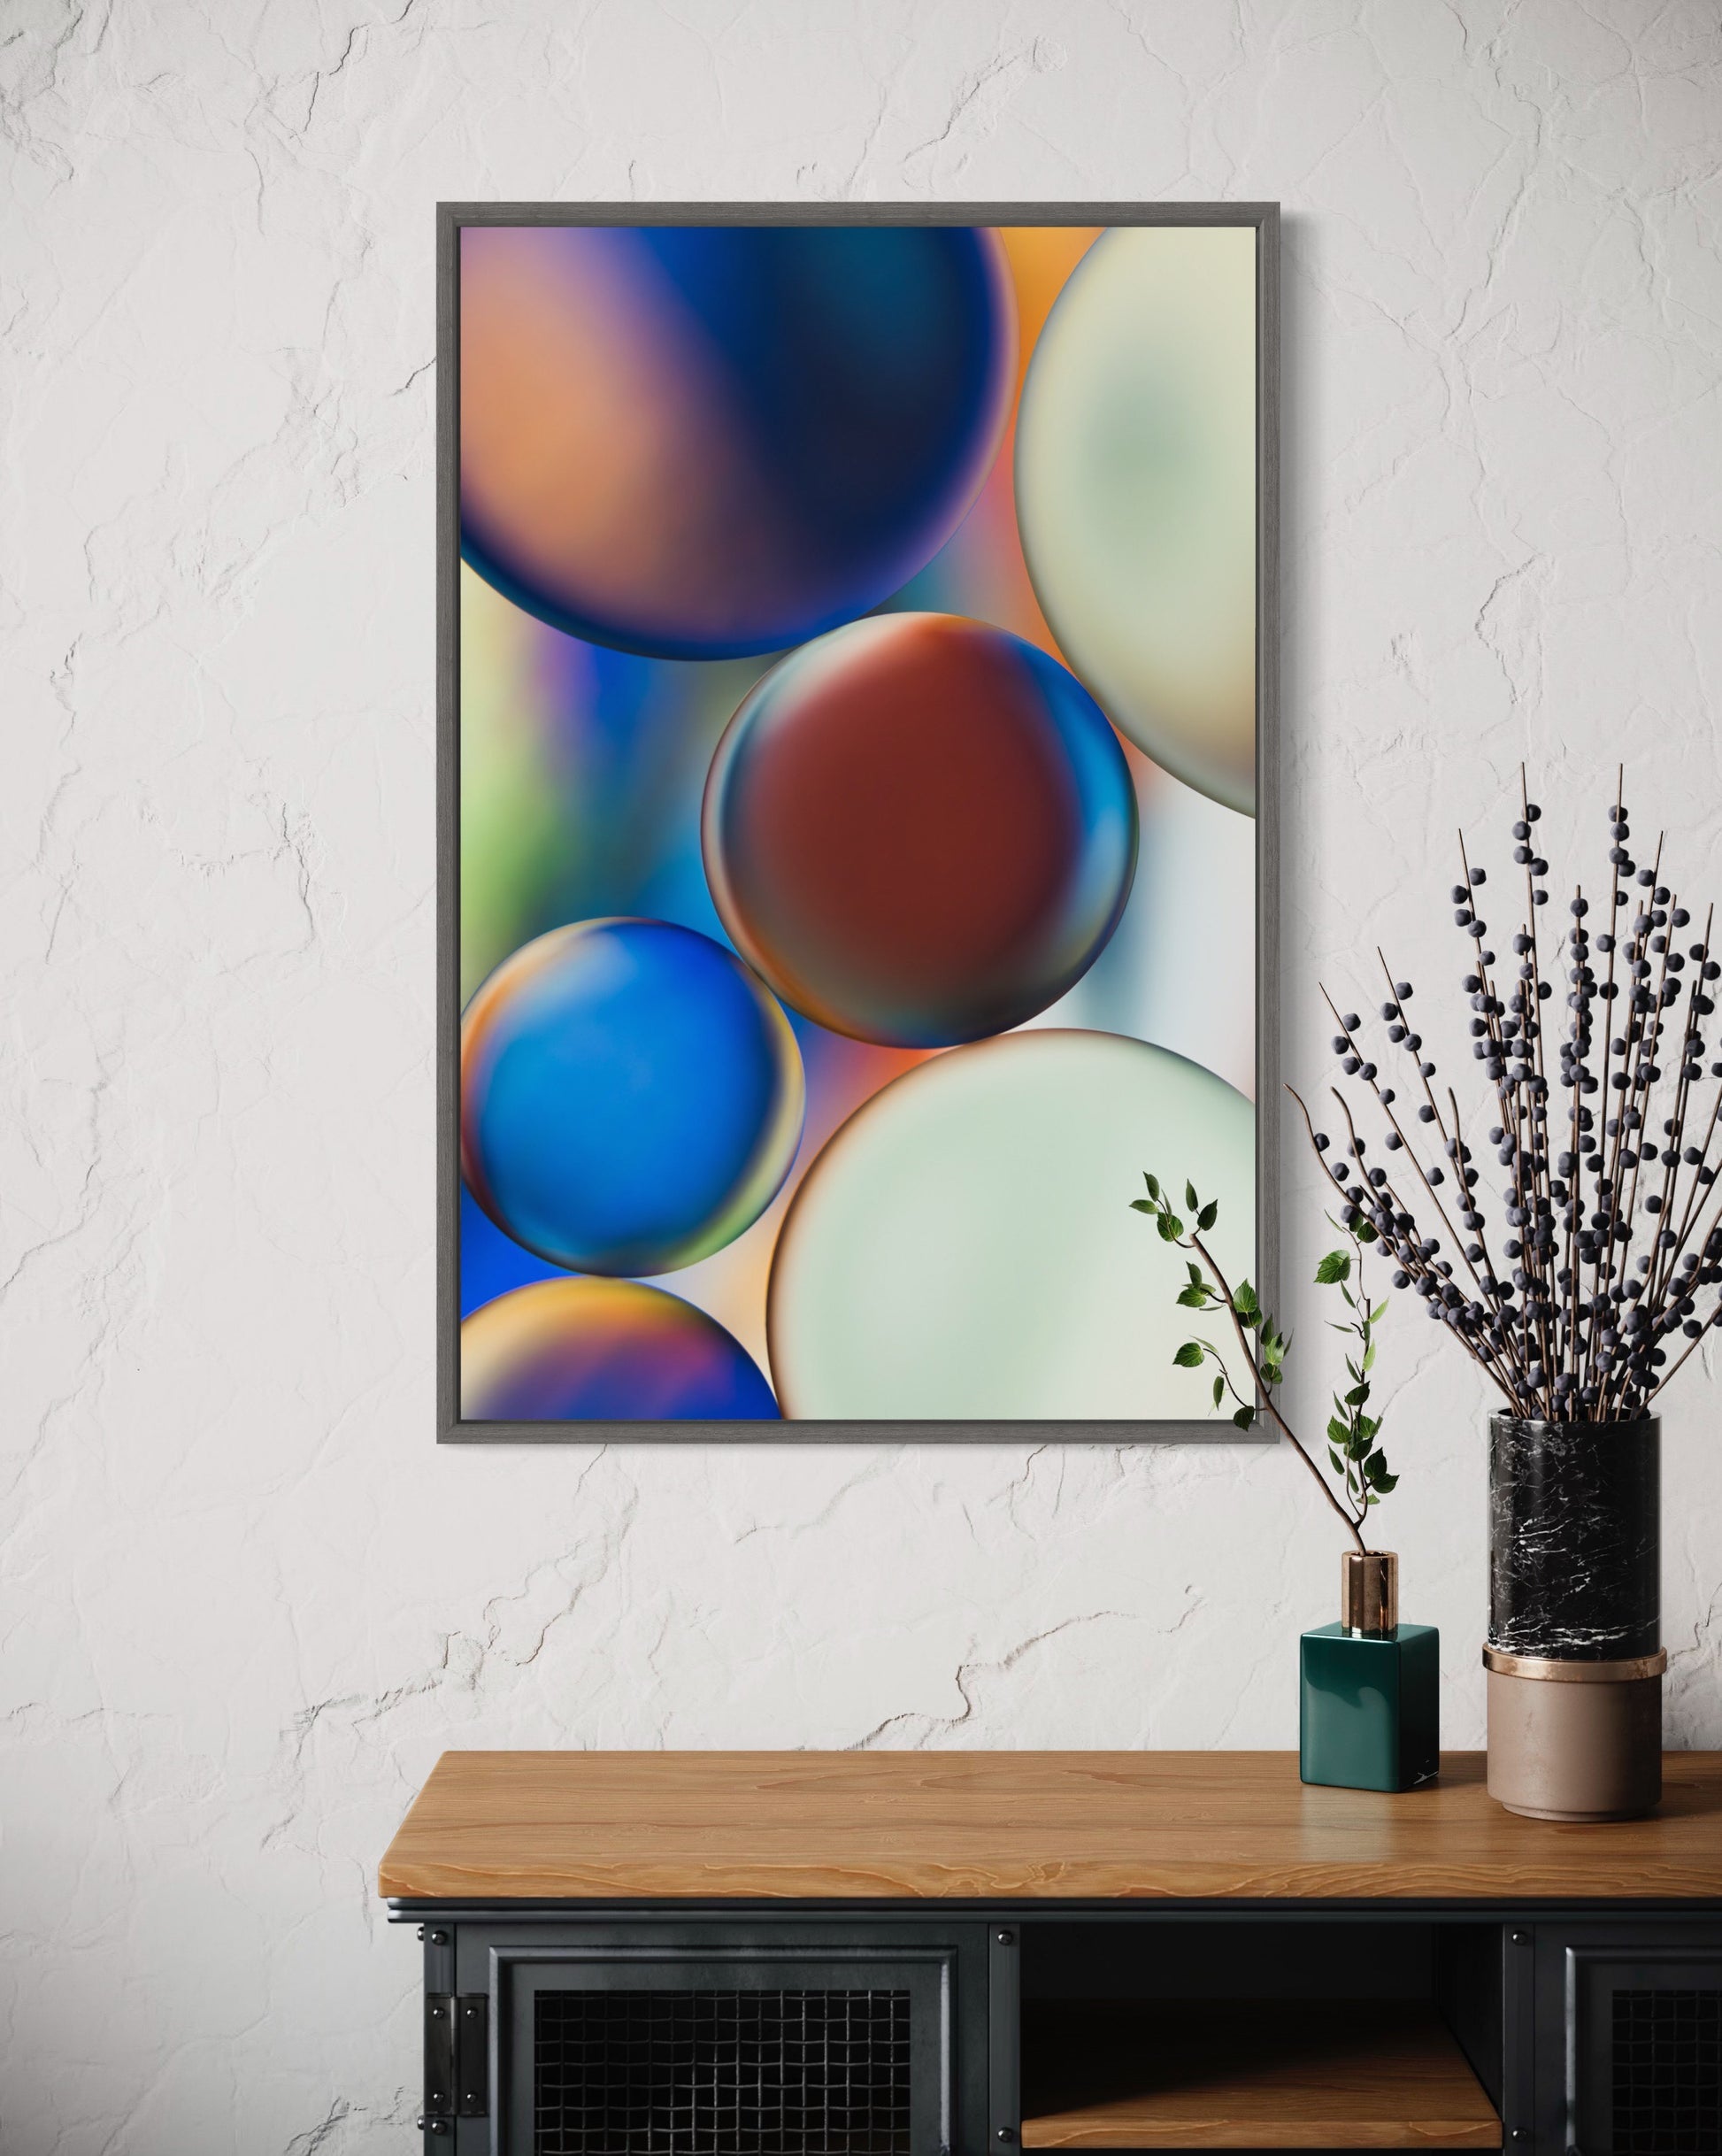 "Mosaic Memories 3" is a stunning macro photograph blending oil and water into an abstract pattern. The primary colors are blue, white, brown, orange and green. This contemporary fine art piece is perfect as vibrant wall art, printed on metallic paper and mounted to acrylic for depth and brilliance. A unique, modern addition to any home, office, or gallery.